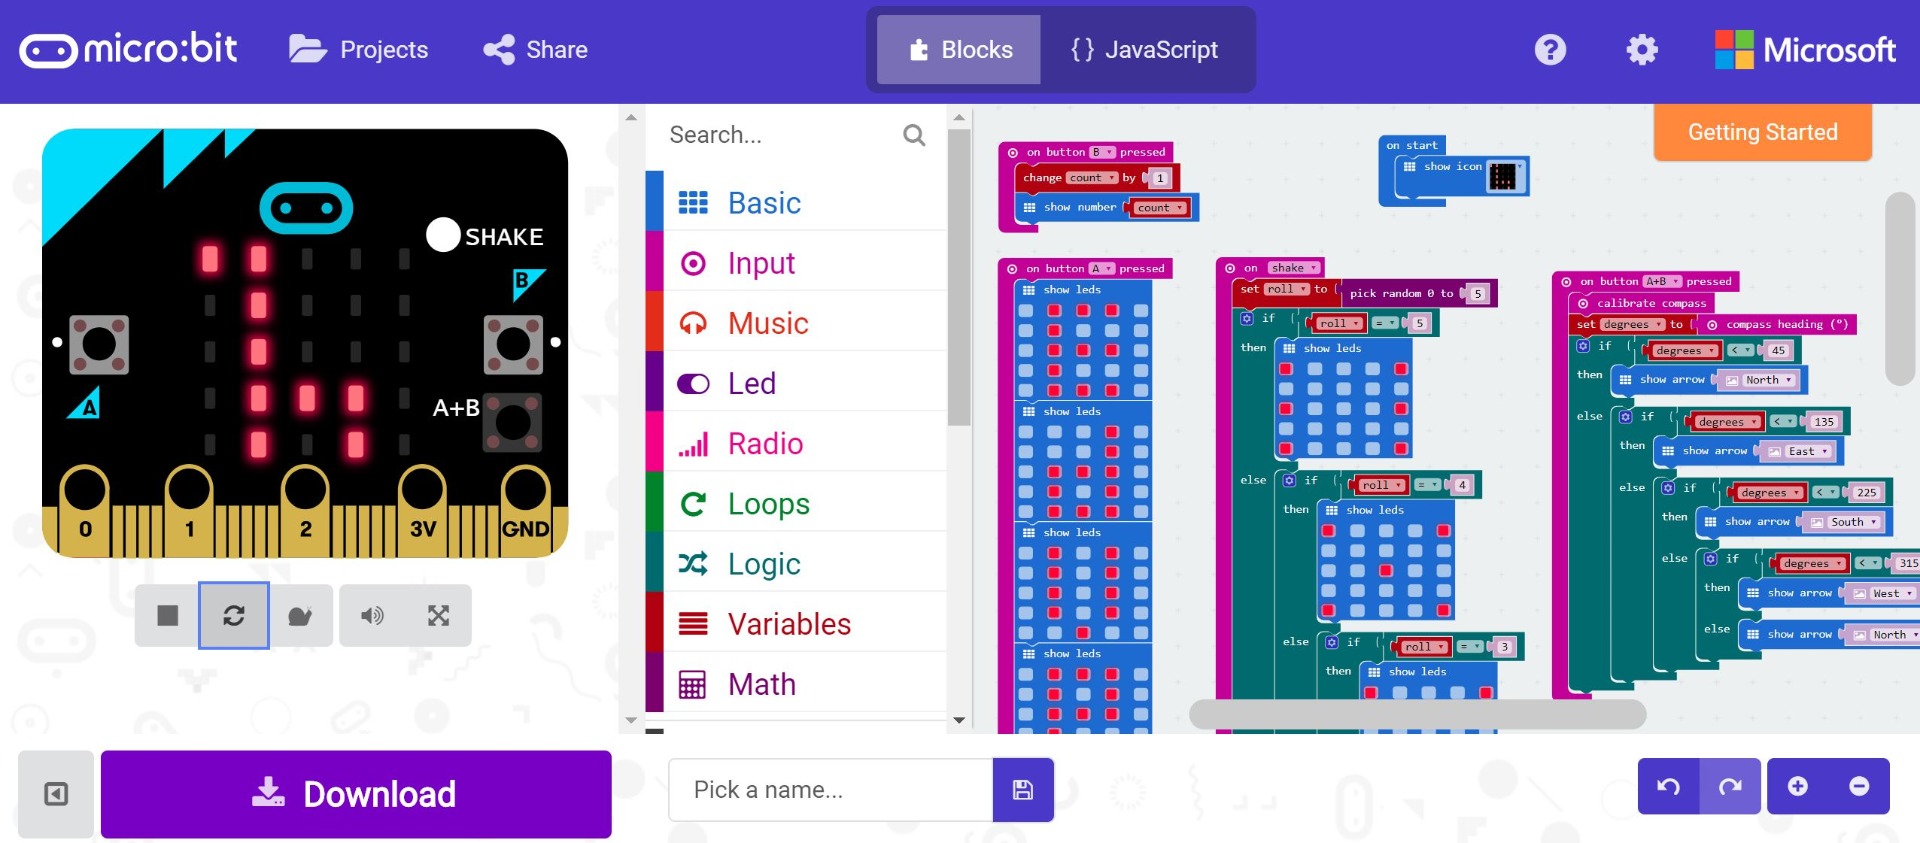 a micro:bit V1 program in the Microsoft MakeCode environment